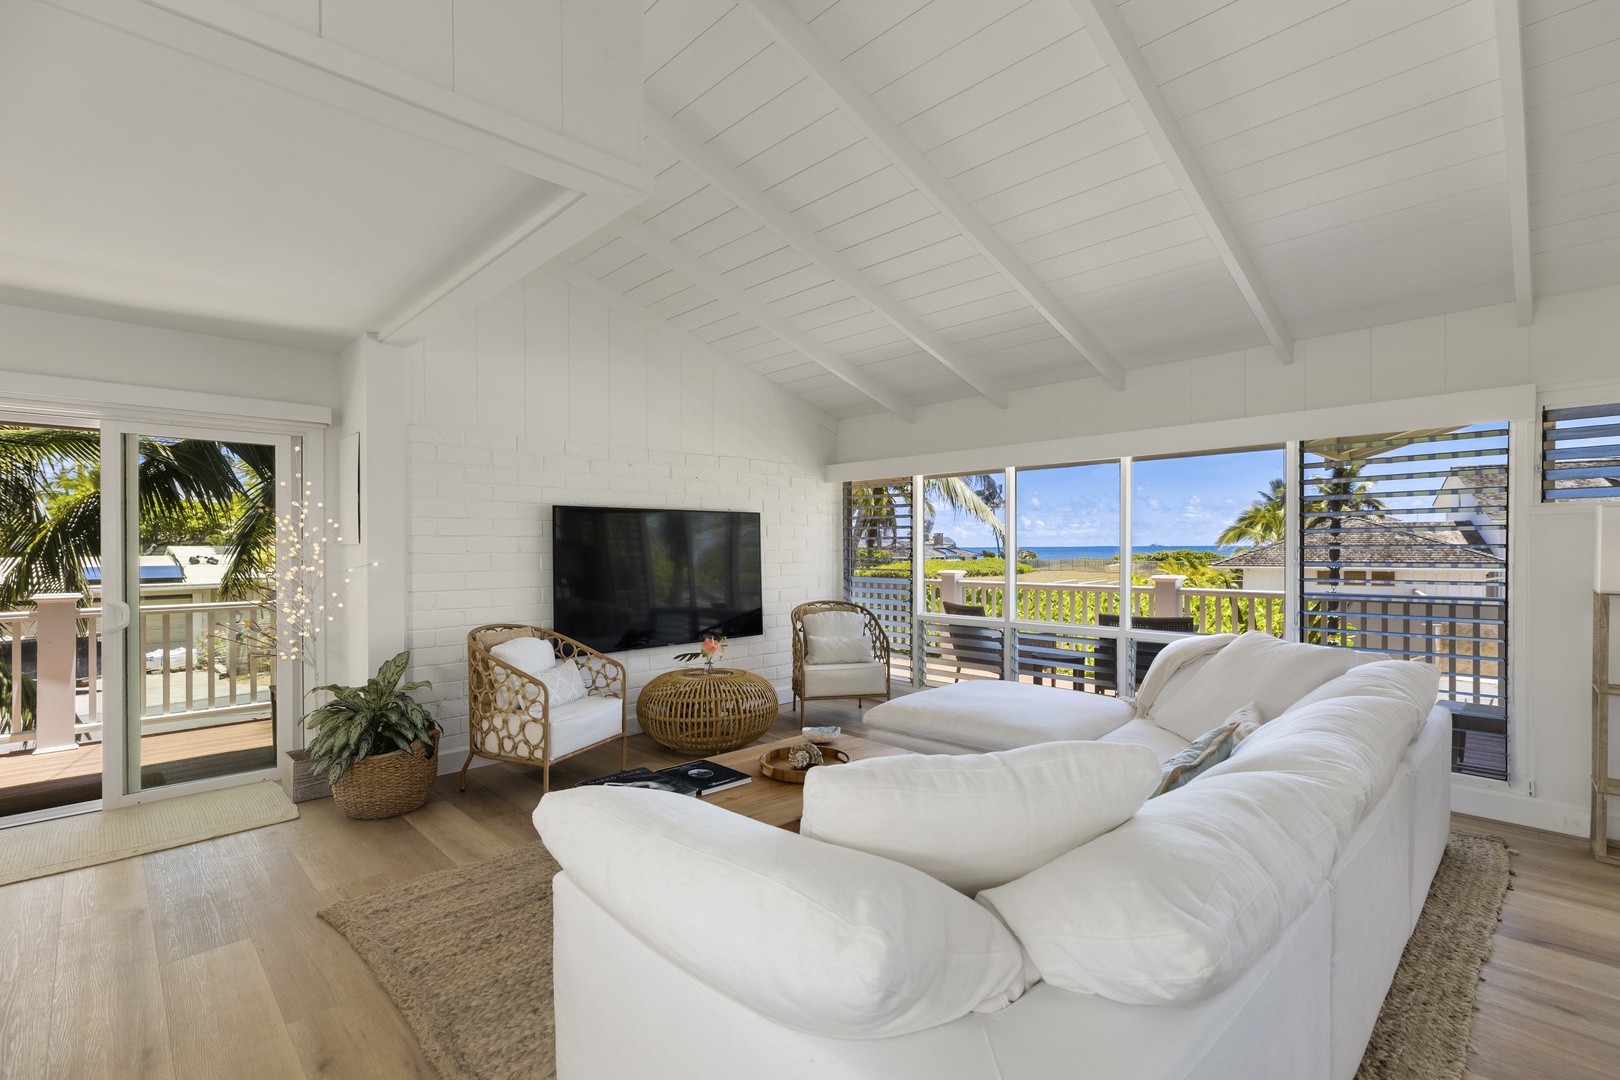 Kailua Vacation Rentals, Seahorse Beach House - Front House Living Room with Ocean Views